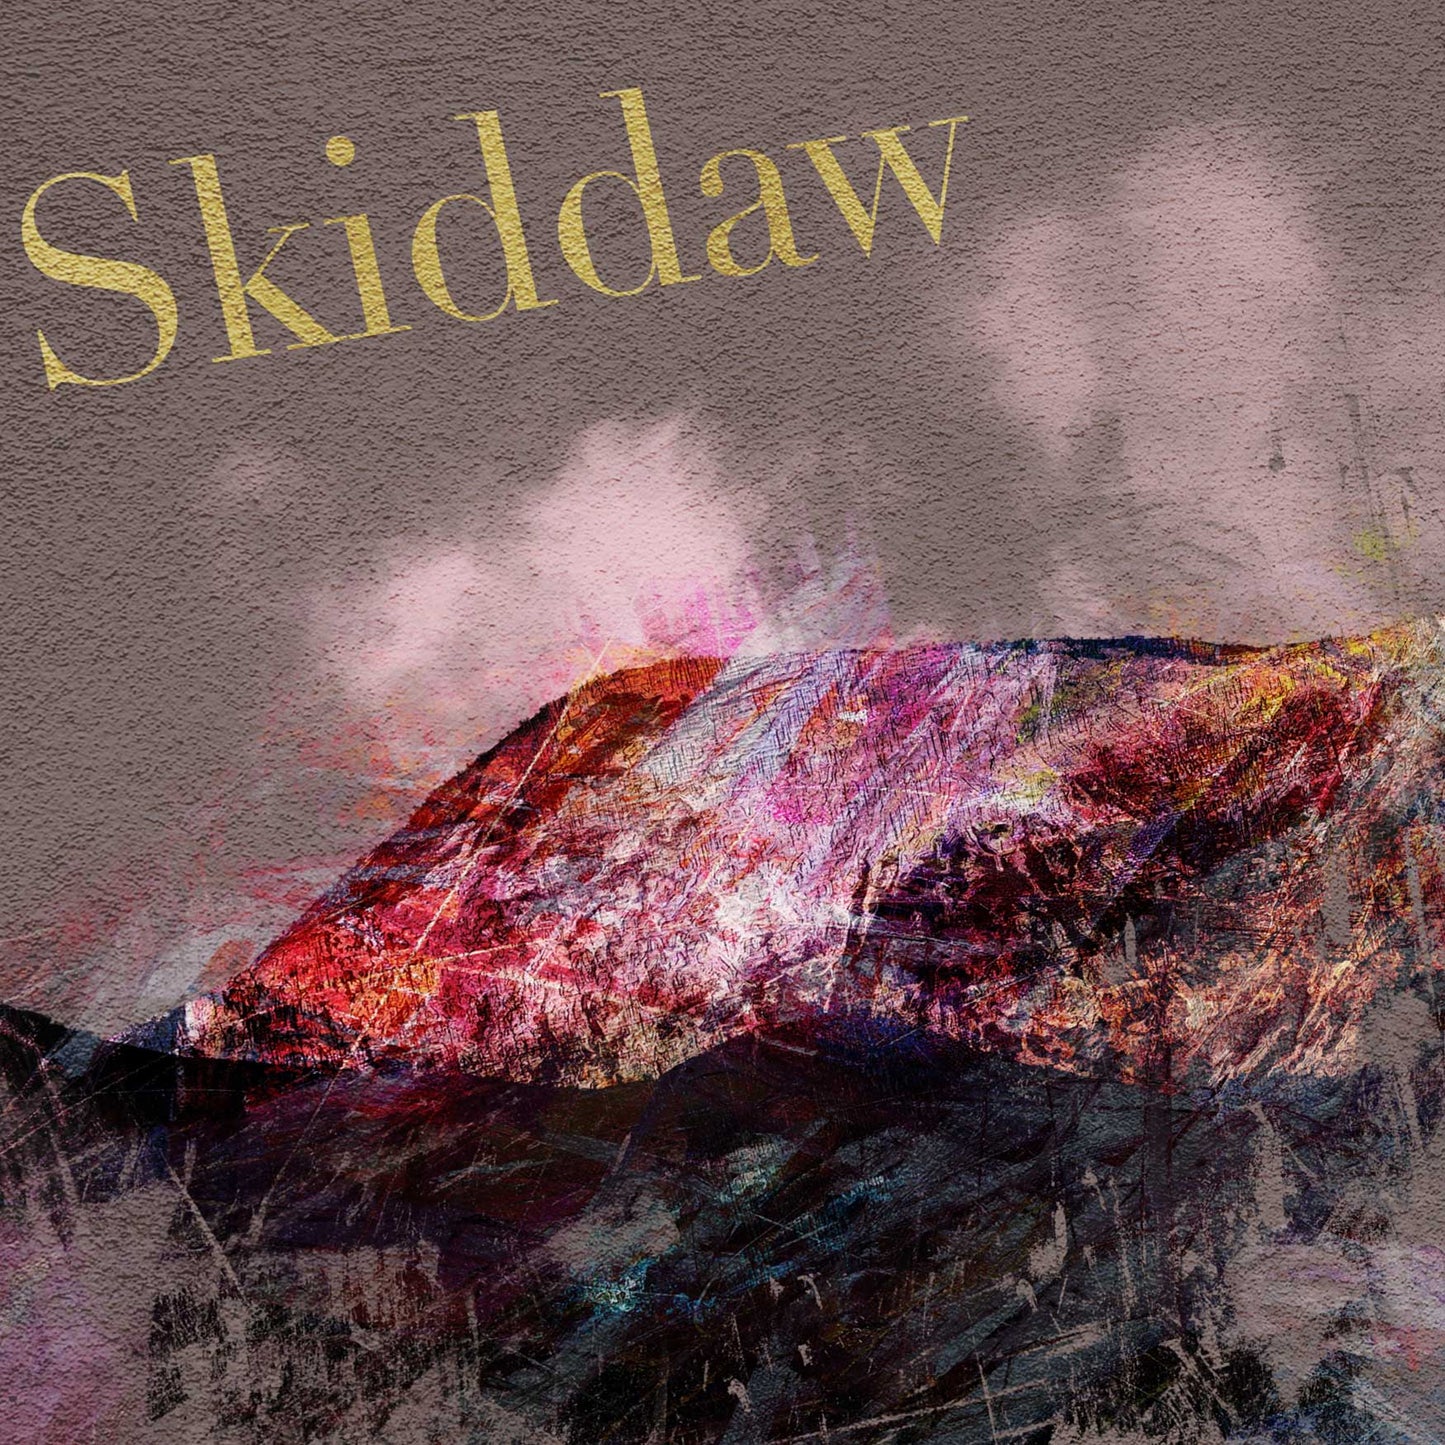 Skiddaw in Wainwright's Words - Poster Print